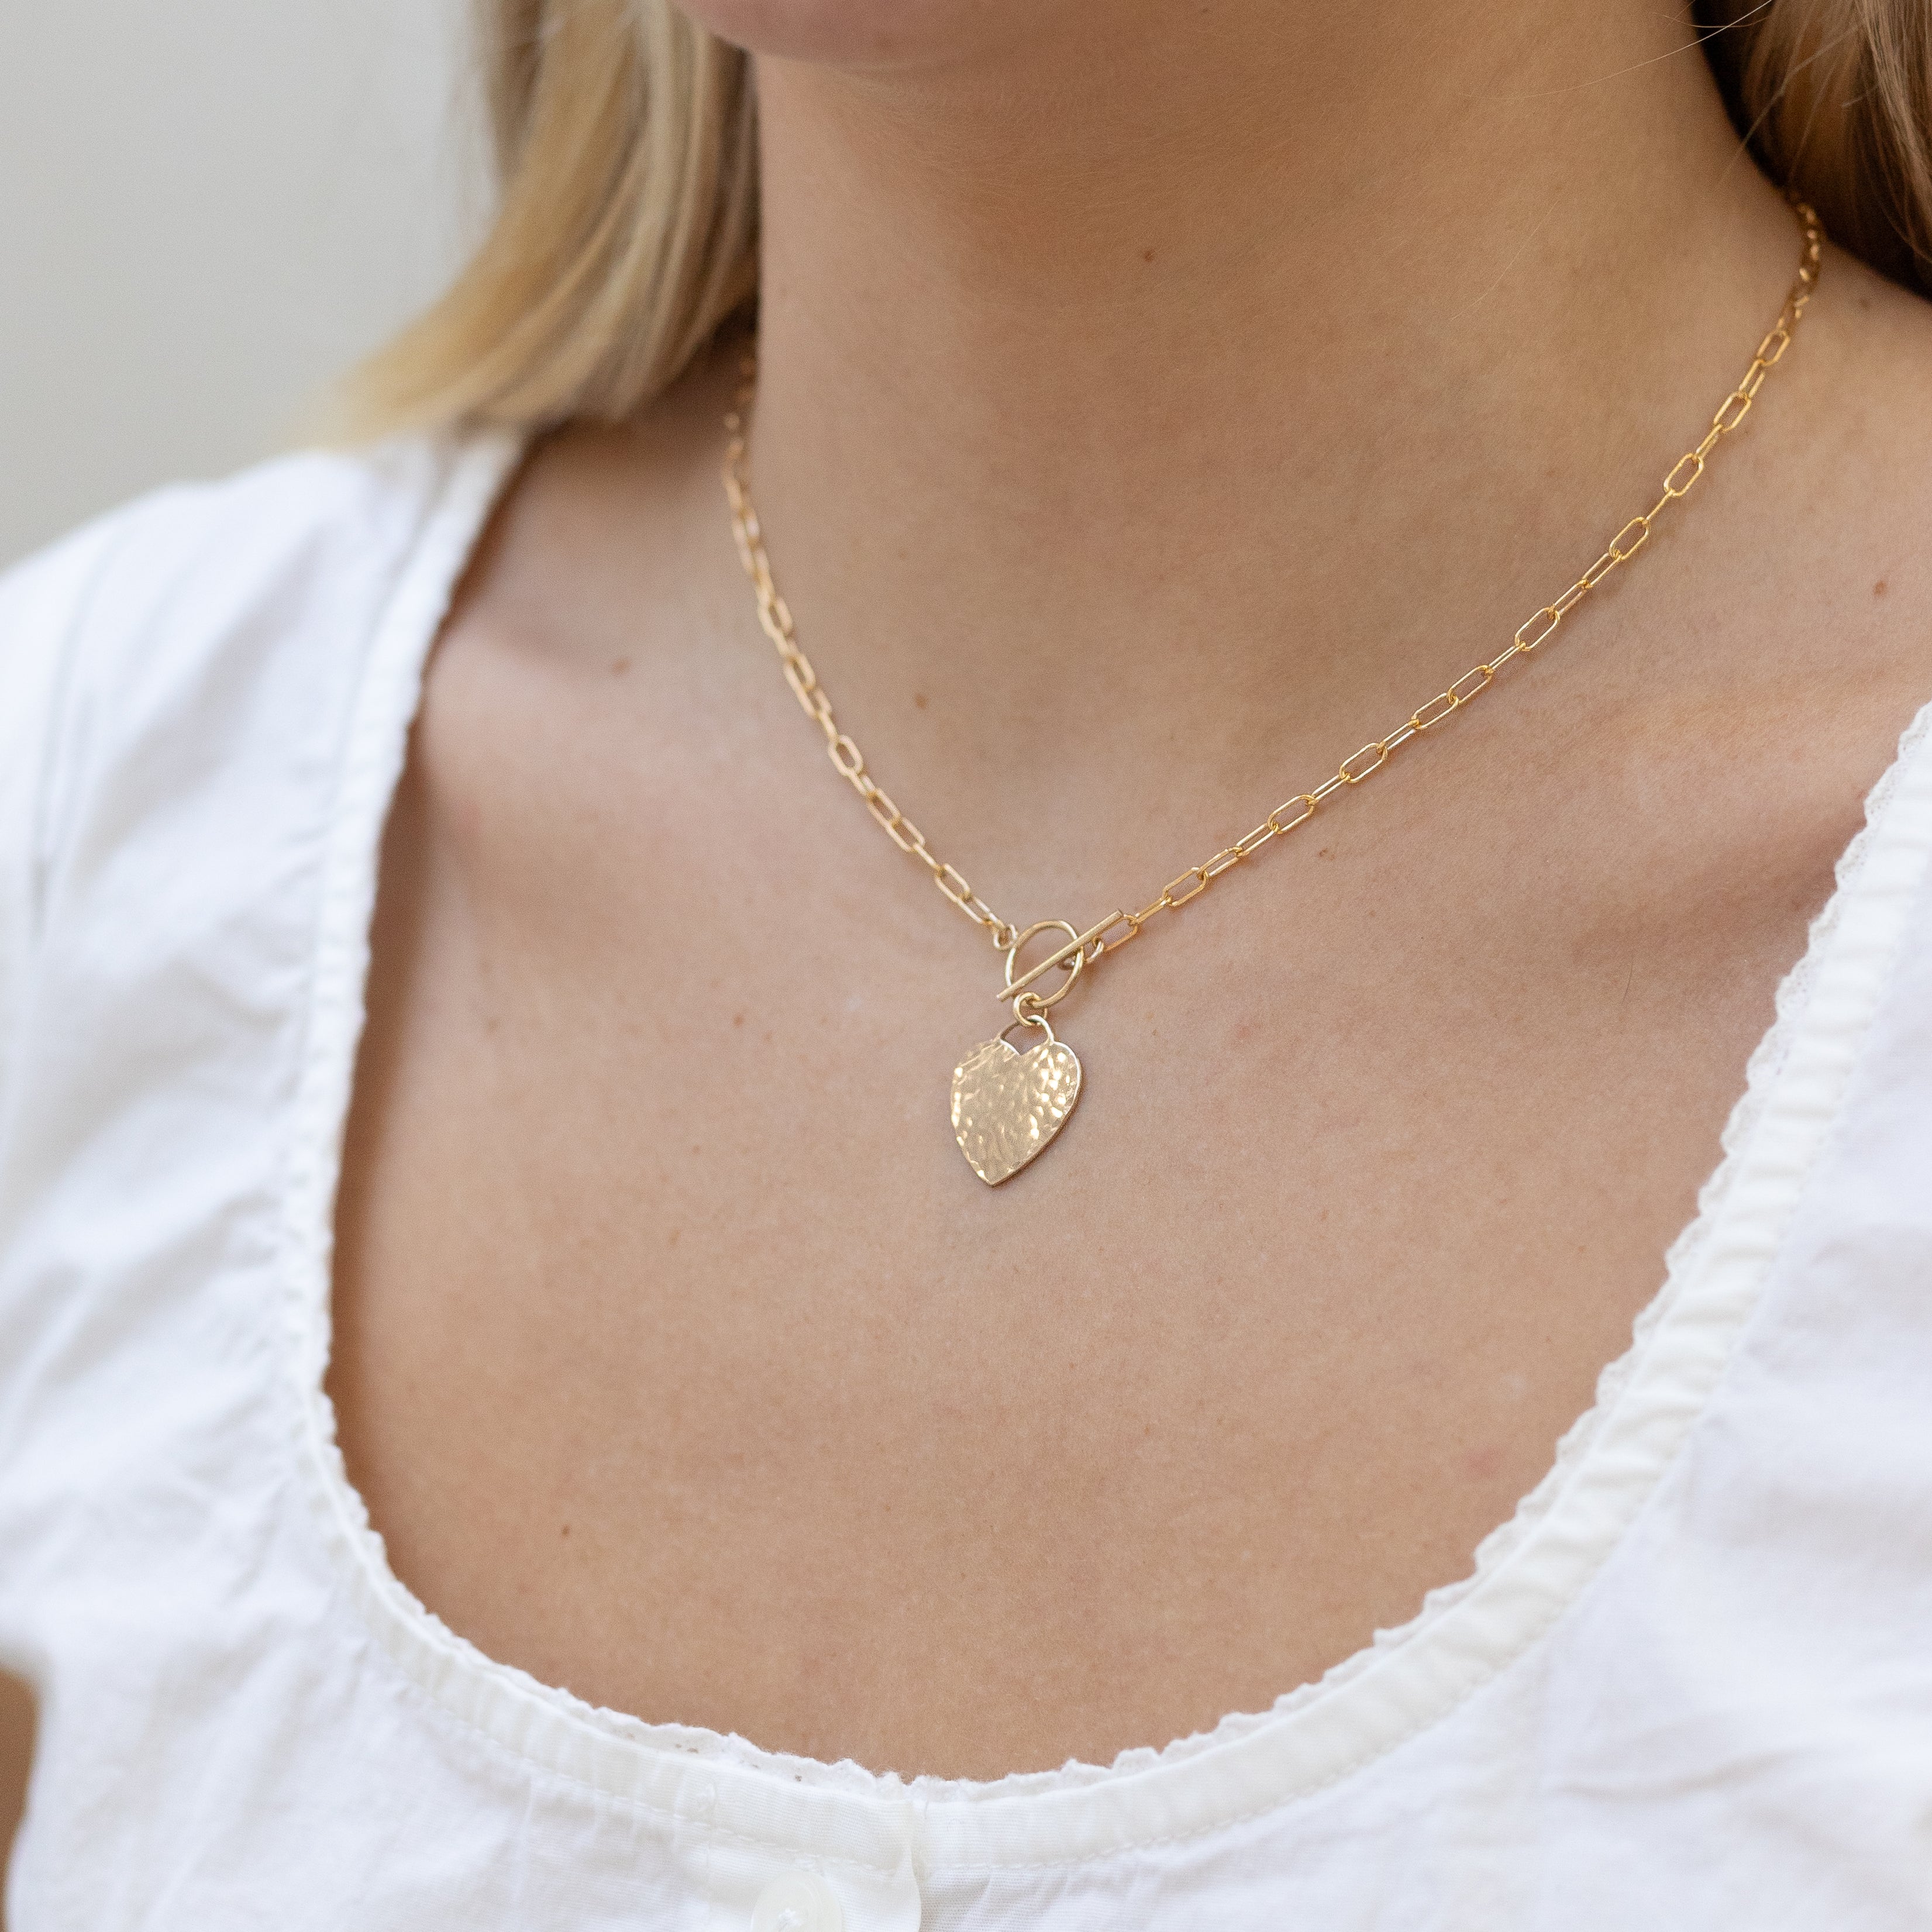 Hammered Heart Toggle Necklace